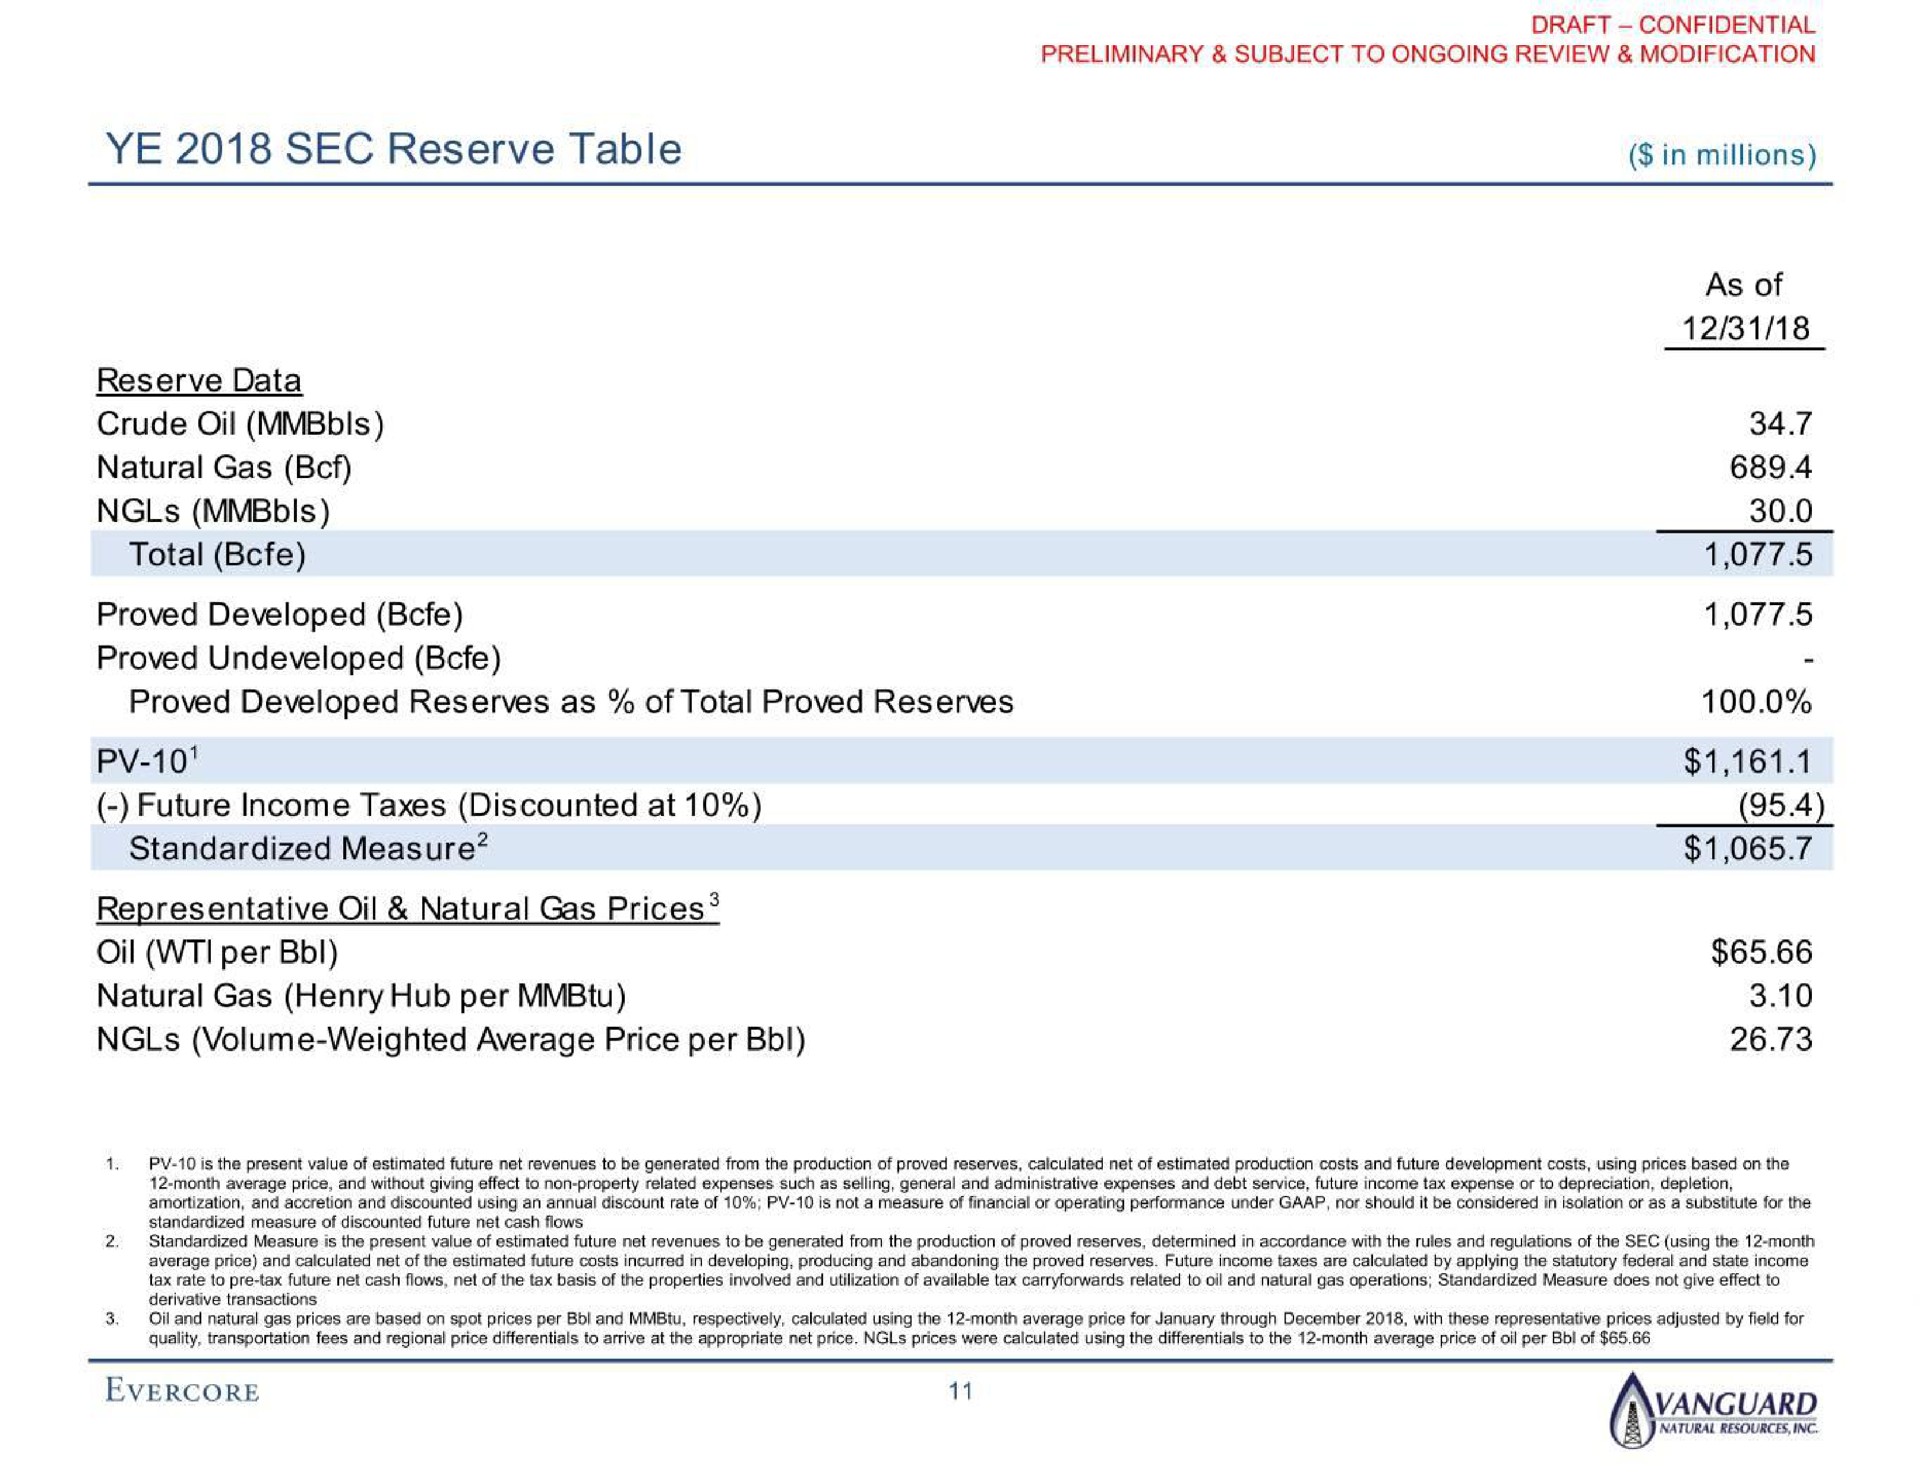 sec reserve table reserve data crude oil natural gas total proved developed proved undeveloped proved developed reserves as of total proved reserves future income taxes discounted at standardized measure representative oil natural gas prices oil per natural gas henry hub per volume weighted average price per | Evercore